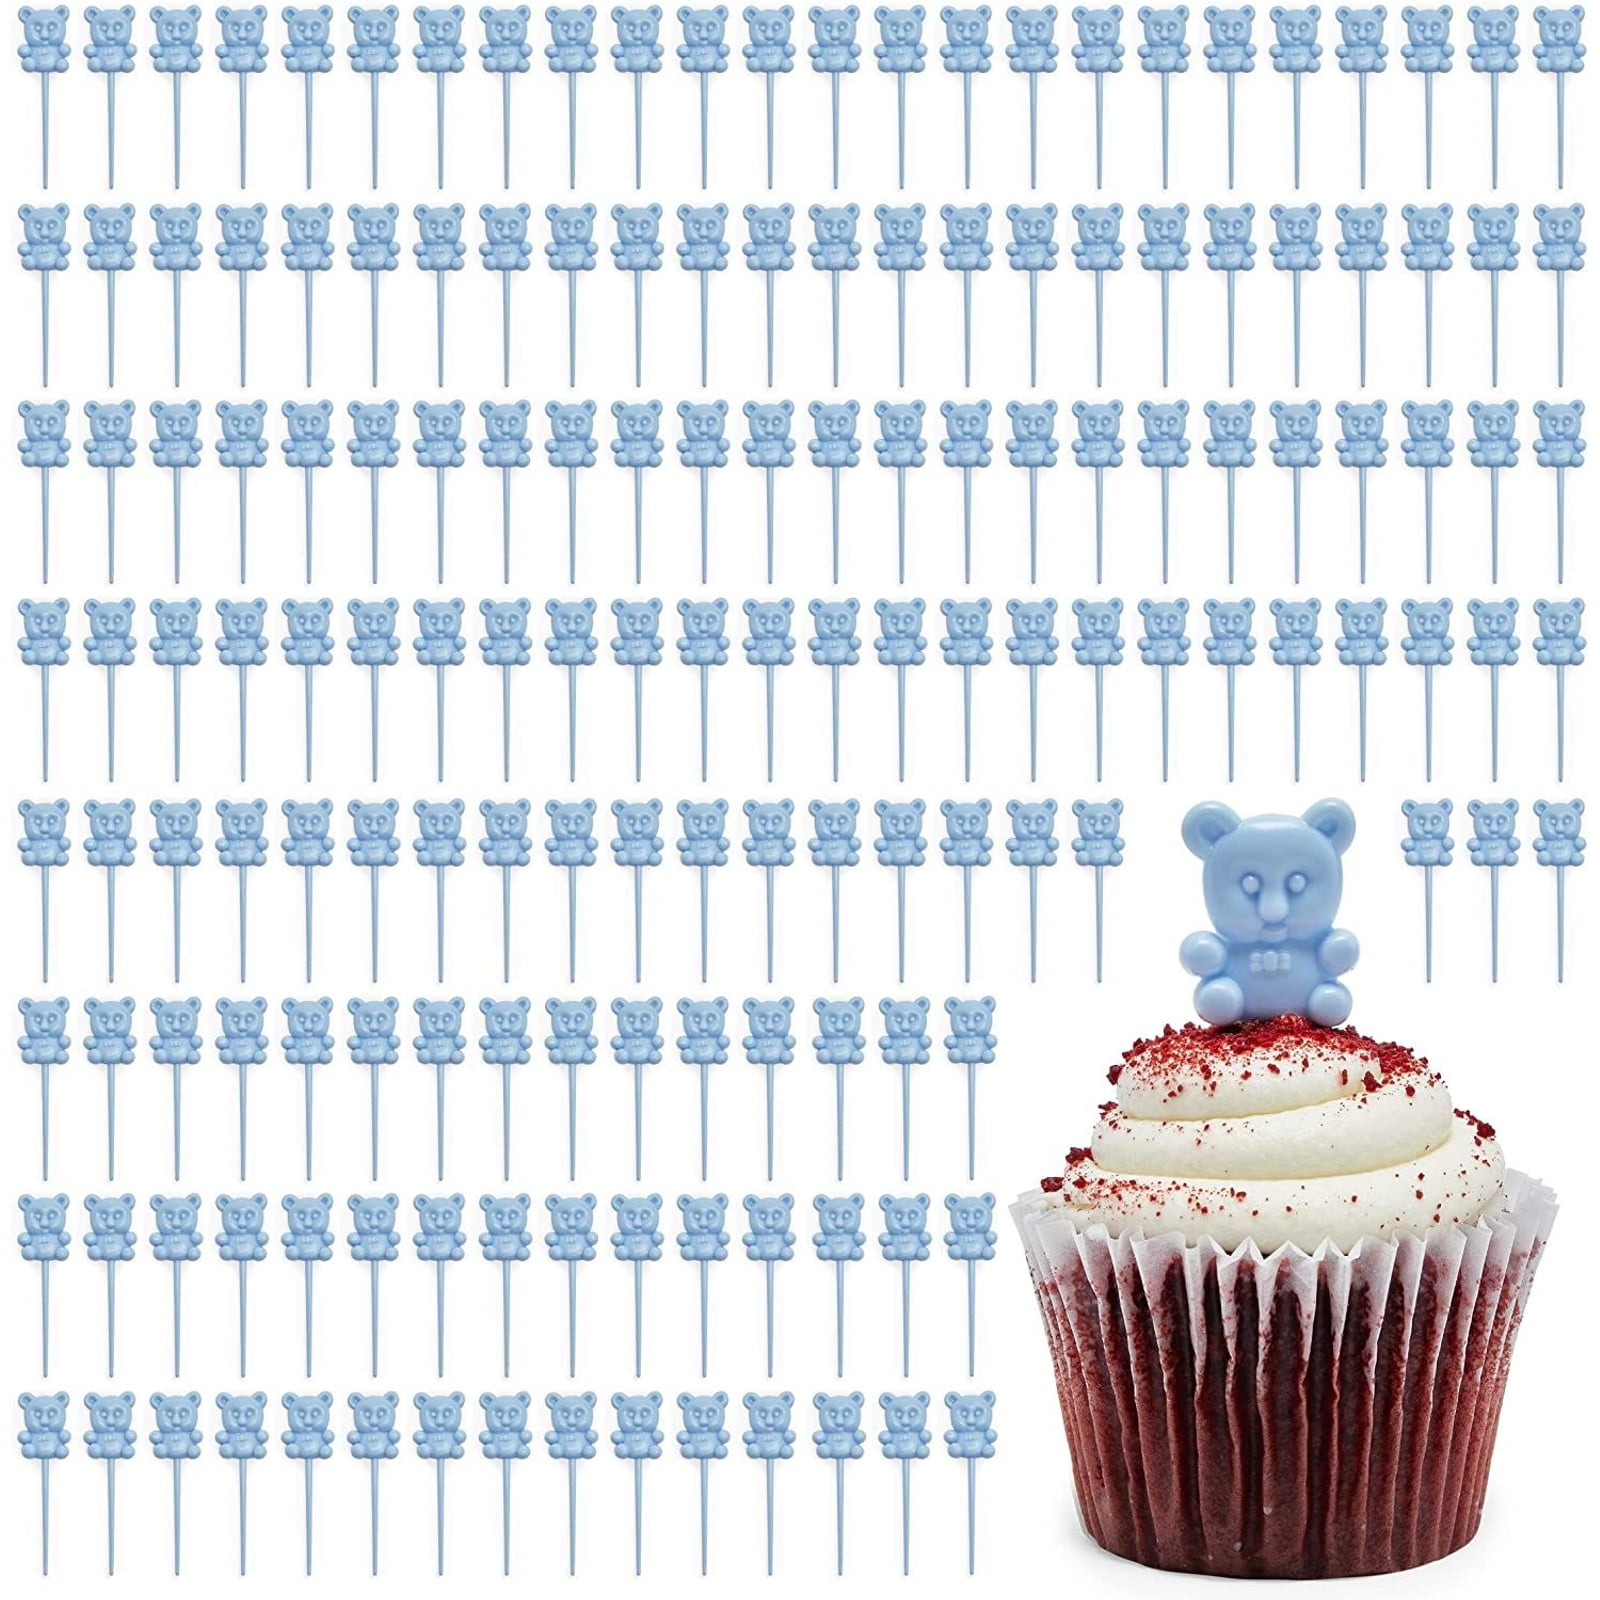 20 x It's A Boy/Girl Cake Picks Cupcake Toppers Flags Baby Shower Decor 6A 